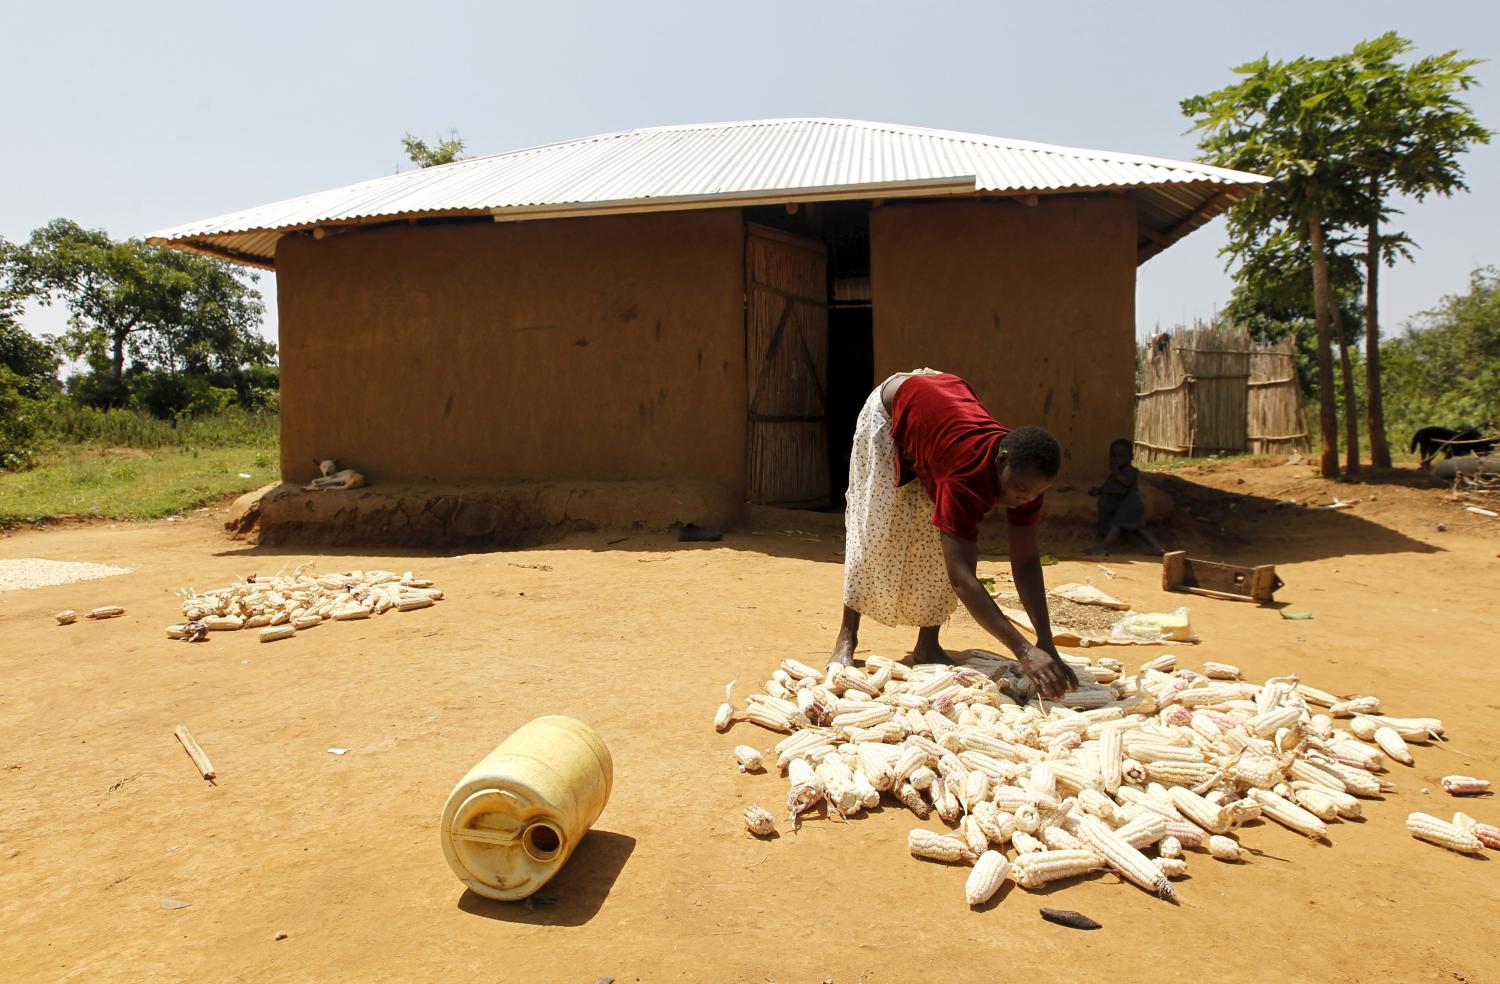 Mary Adhiambo, dries her maize in the sun outside her house in the U.S. President Barack Obama's ancestral village of Nyang'oma Kogelo, west of Kenya's capital Nairobi, July 15, 2015. Adhiambi, 25, said they benefited from Barack Obama's Presidency as they have well tarmacked roads and electricity was connected to the village. "We received grants to build houses and shelter from the harsh weather as an indirect benefit from President Obama's leadership" she said. President Obama visits Kenya and Ethiopia in July, his third major trip to Sub-Saharan Africa after travelling to Ghana in 2009 and to Tanzania, Senegal and South Africa in 2011. He has also visited Egypt, in North Africa, and South Africa for Nelson Mandela's funeral. Obama will be welcomed by a continent that had expected closer attention from a man they claim as their son, a sentiment felt acutely in the Kenyan village where the 44th U.S. president's father is buried. Picture taken July 15, 2015. REUTERS/Thomas Mukoya - GF10000168062